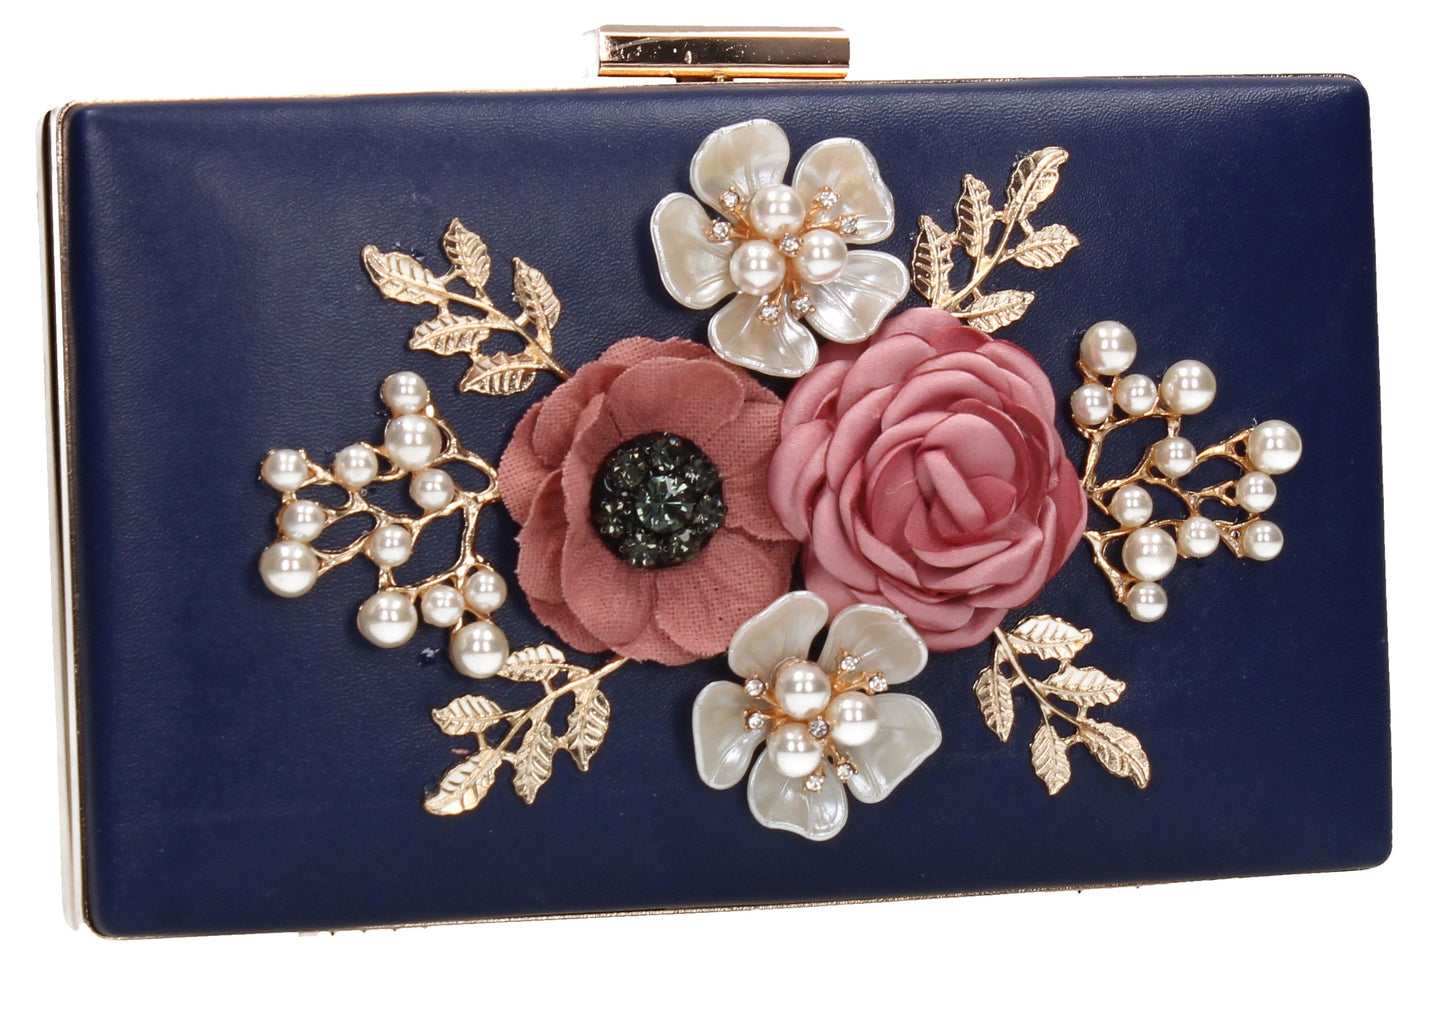 SWANKYSWANS Valery Floral Detail Clutch Bag Navy Cute Cheap Clutch Bag For Weddings School and Work